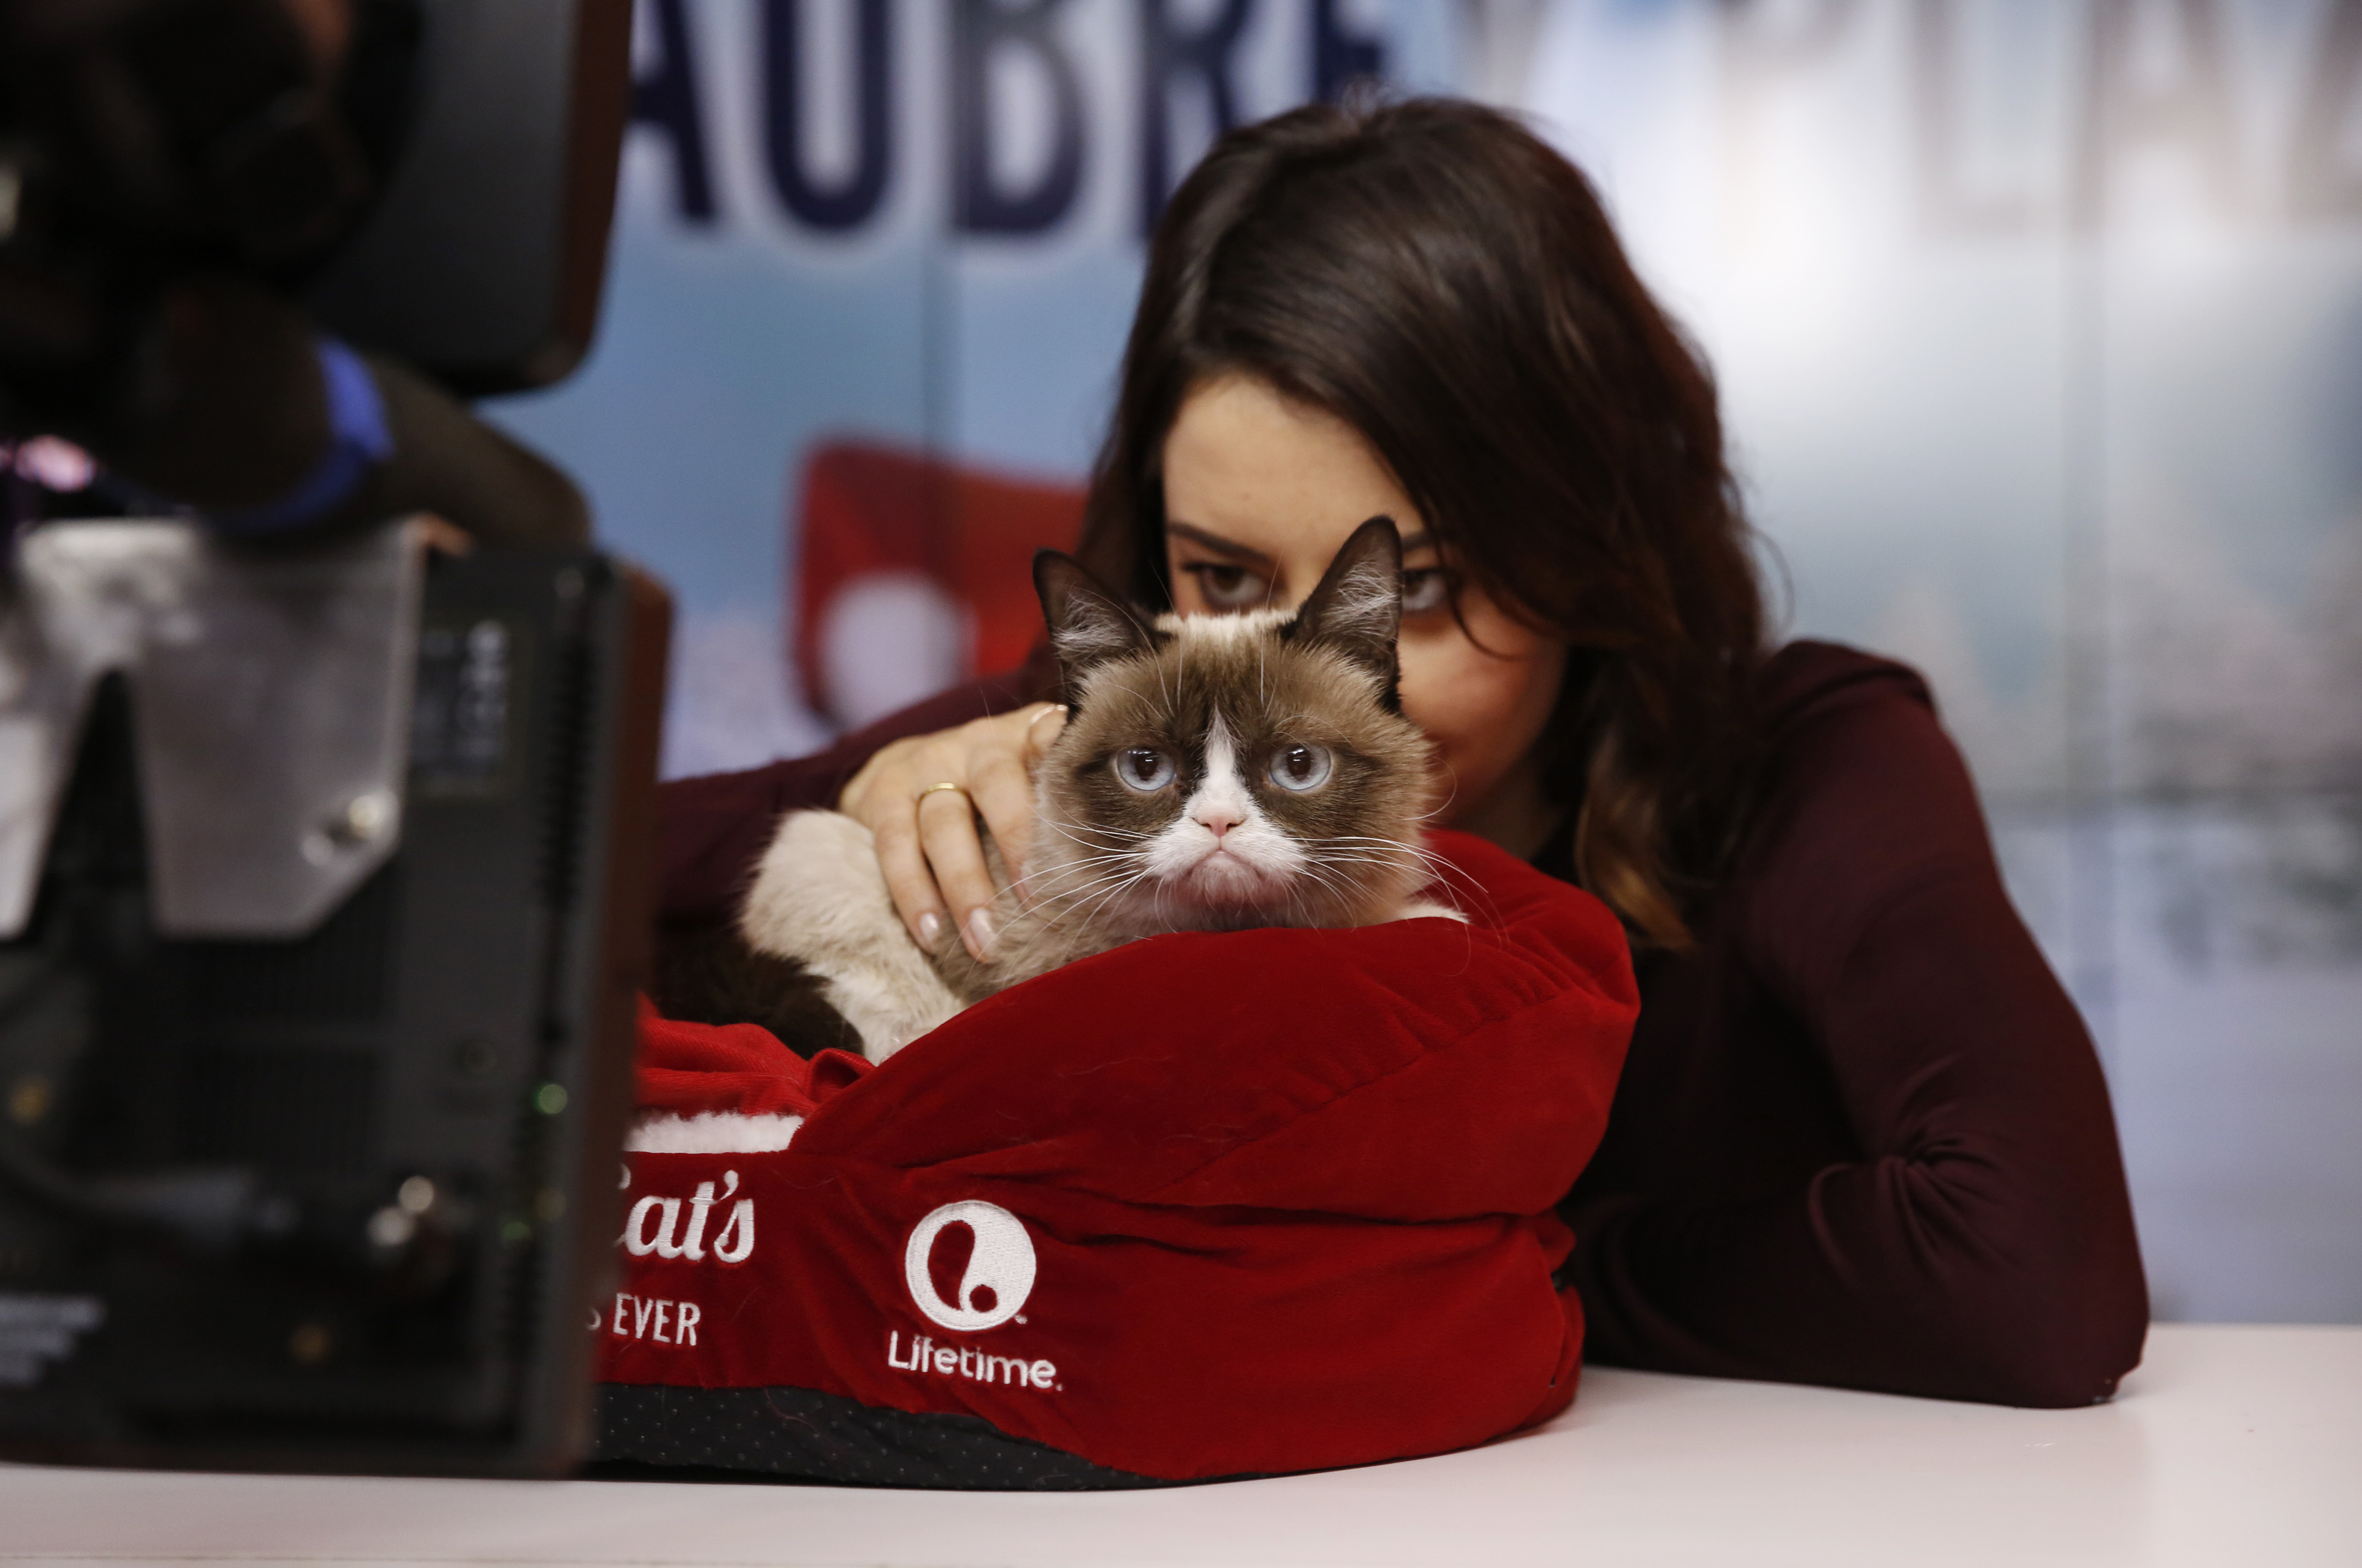 Aubrey Plaza and Grumpy Cat appear on NBC News' "Today" show on Nov. 24, 2014.